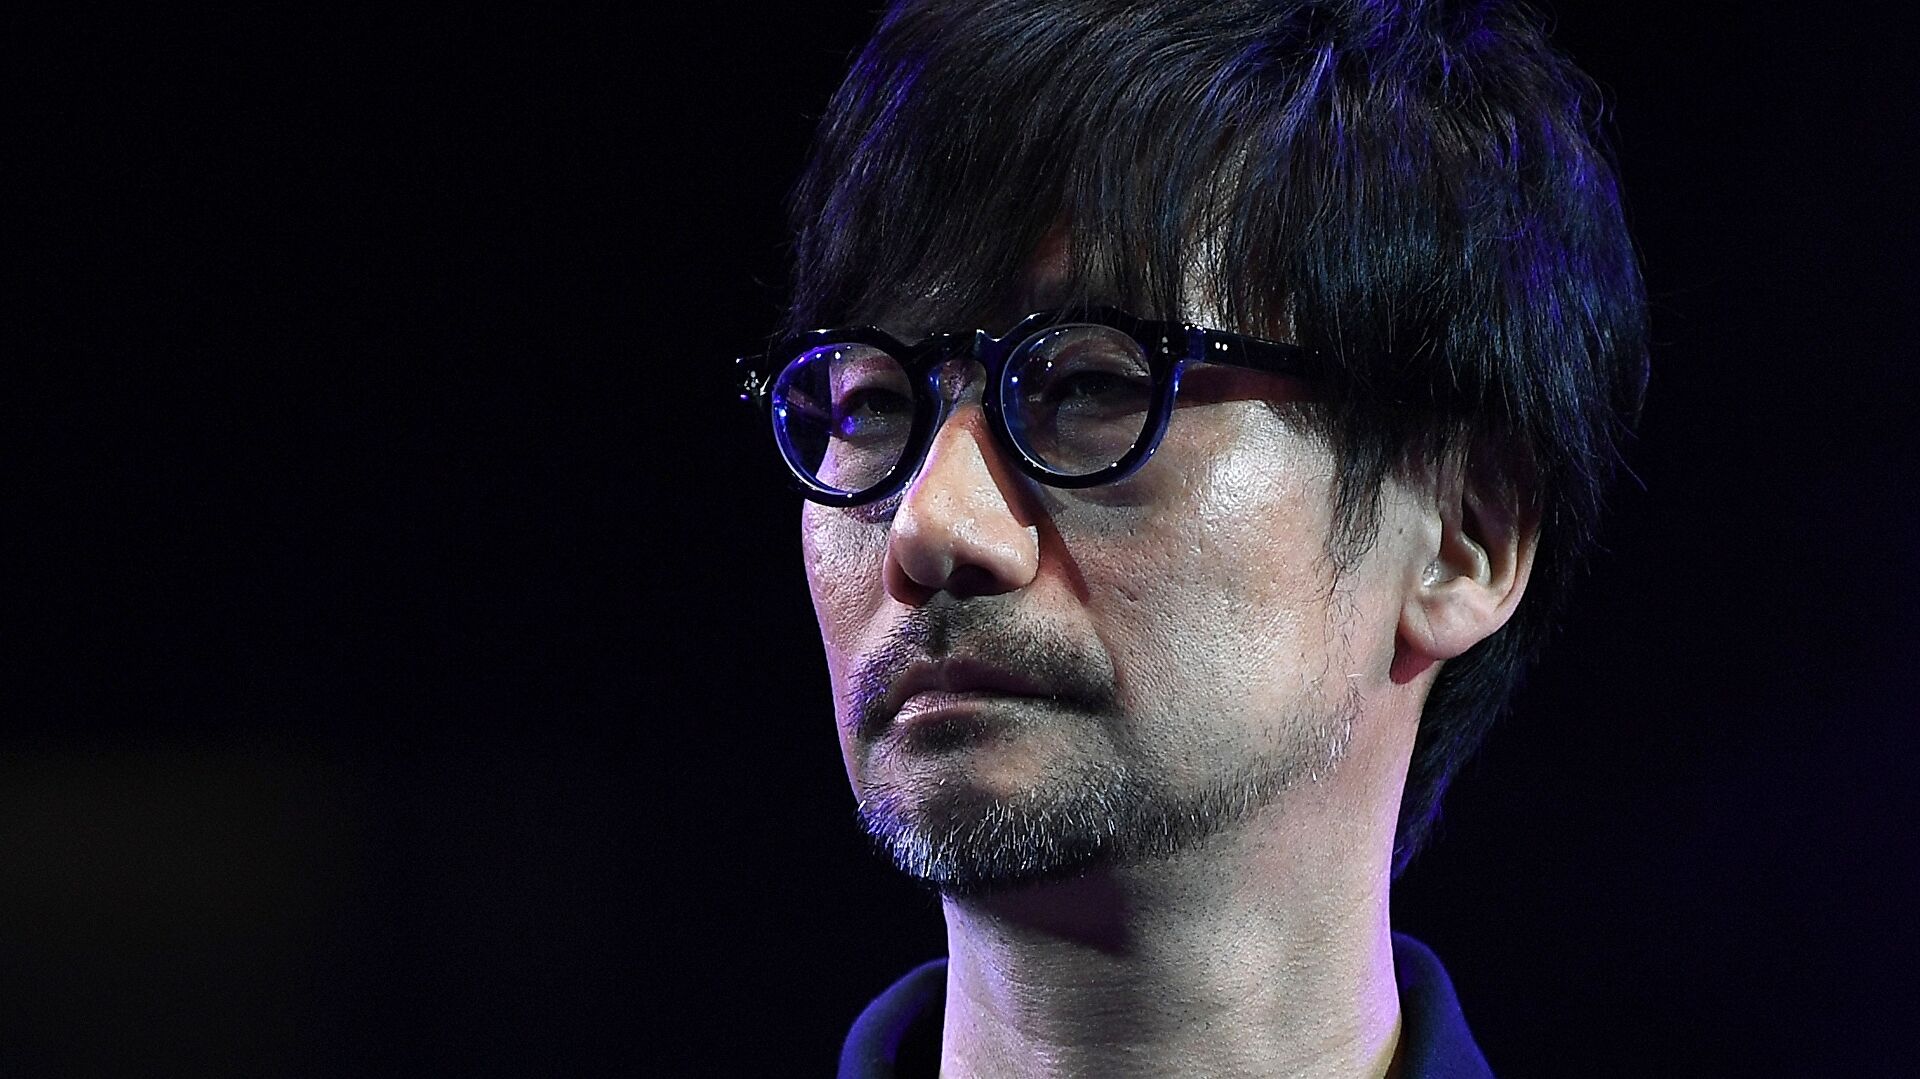 Image for Xbox and Hideo Kojima confirm partnership on new game